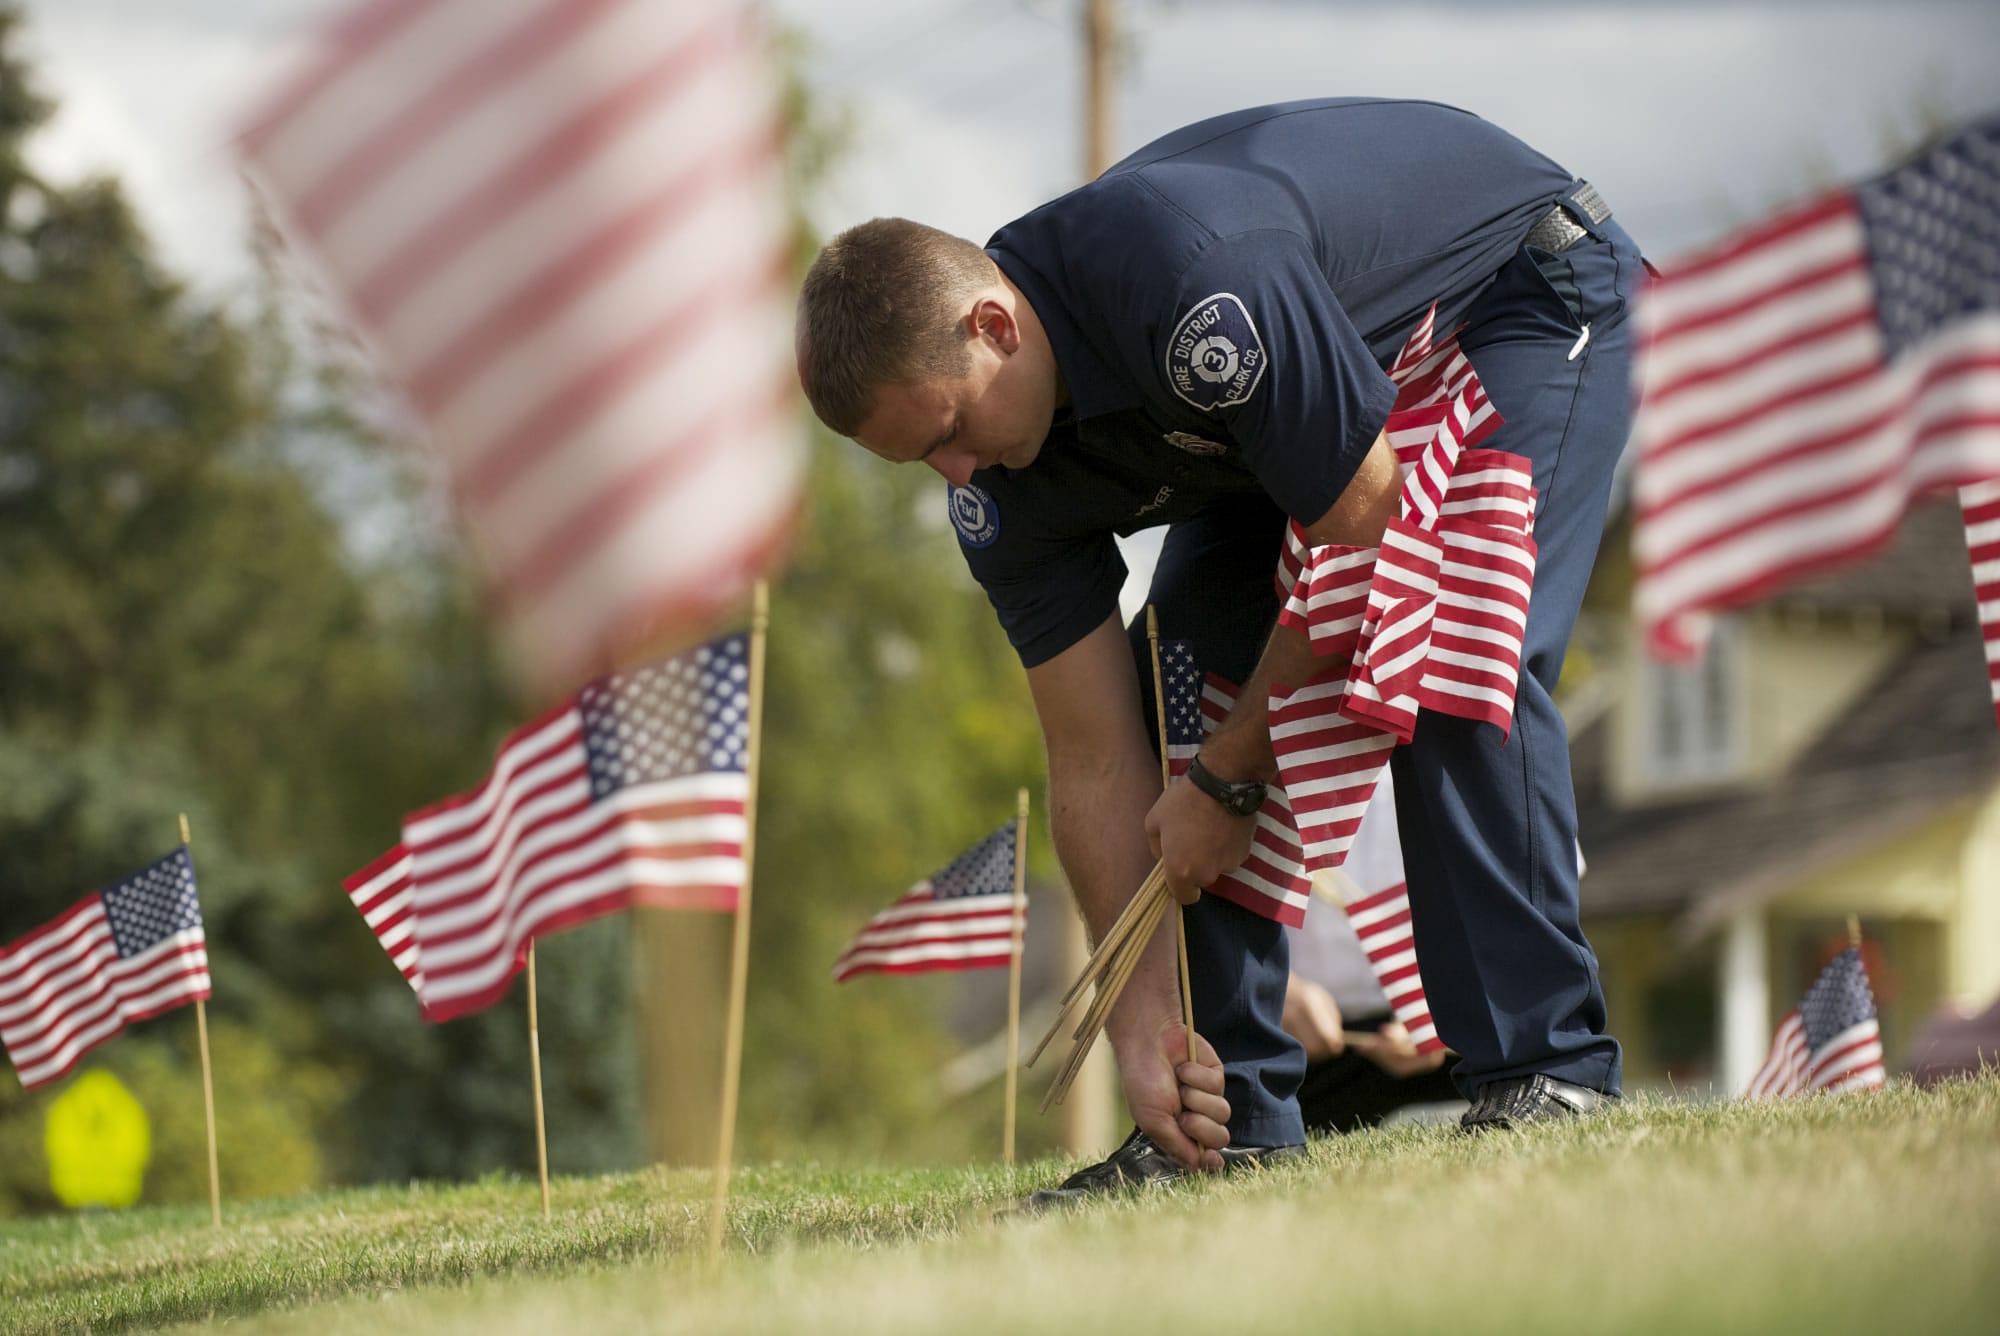 Nolan Meyer and other Clark County Fire District 3 firefighters planted 304 American flags in front of the Hockinson station Monday in remembrance of the Sept. 11 attacks. A commemoration will be held at 6:58 a.m. today at the station, 17718 N.E.